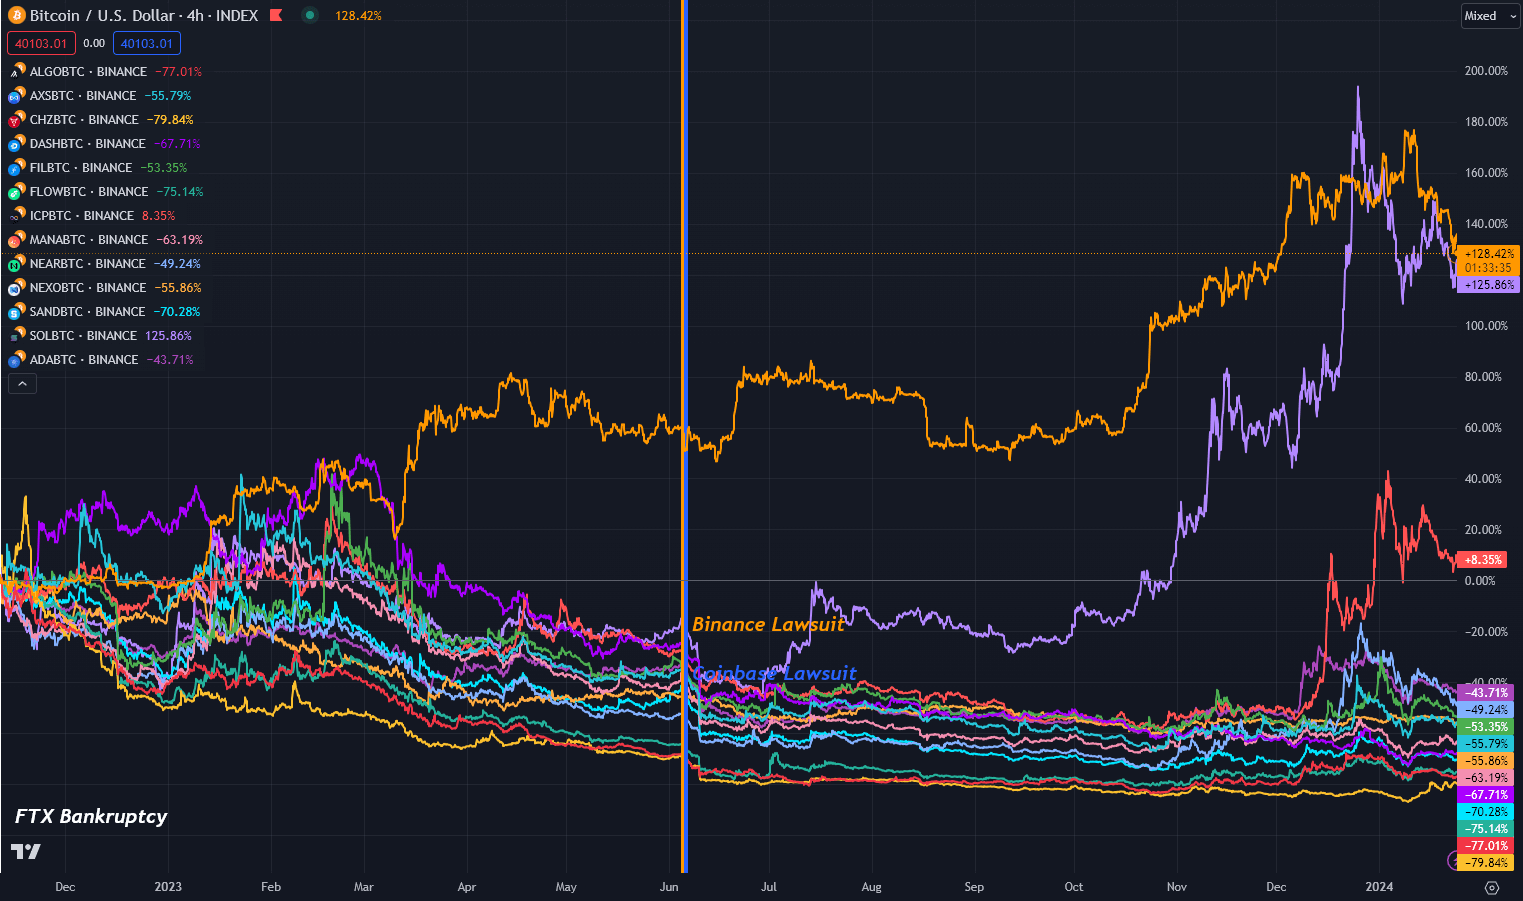 Token performance since the FTX collapse